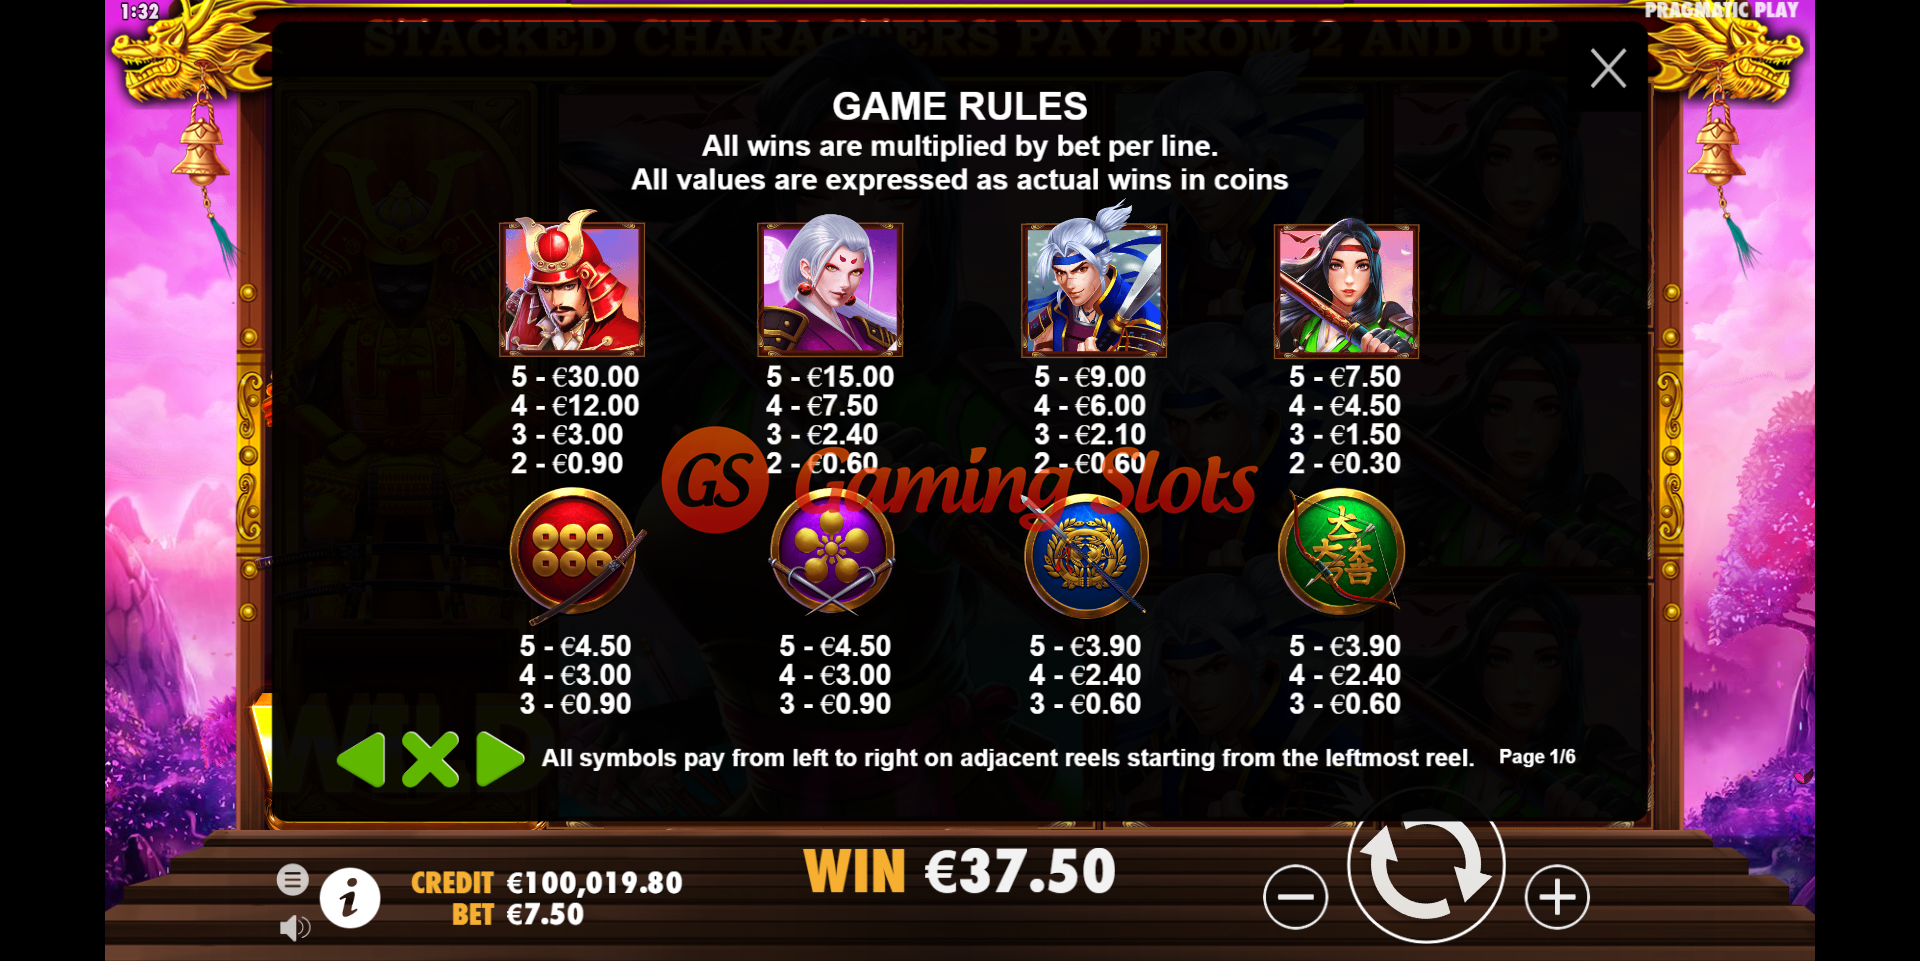 Game Rules for Rise of Samurai slot from Pragmatic Play